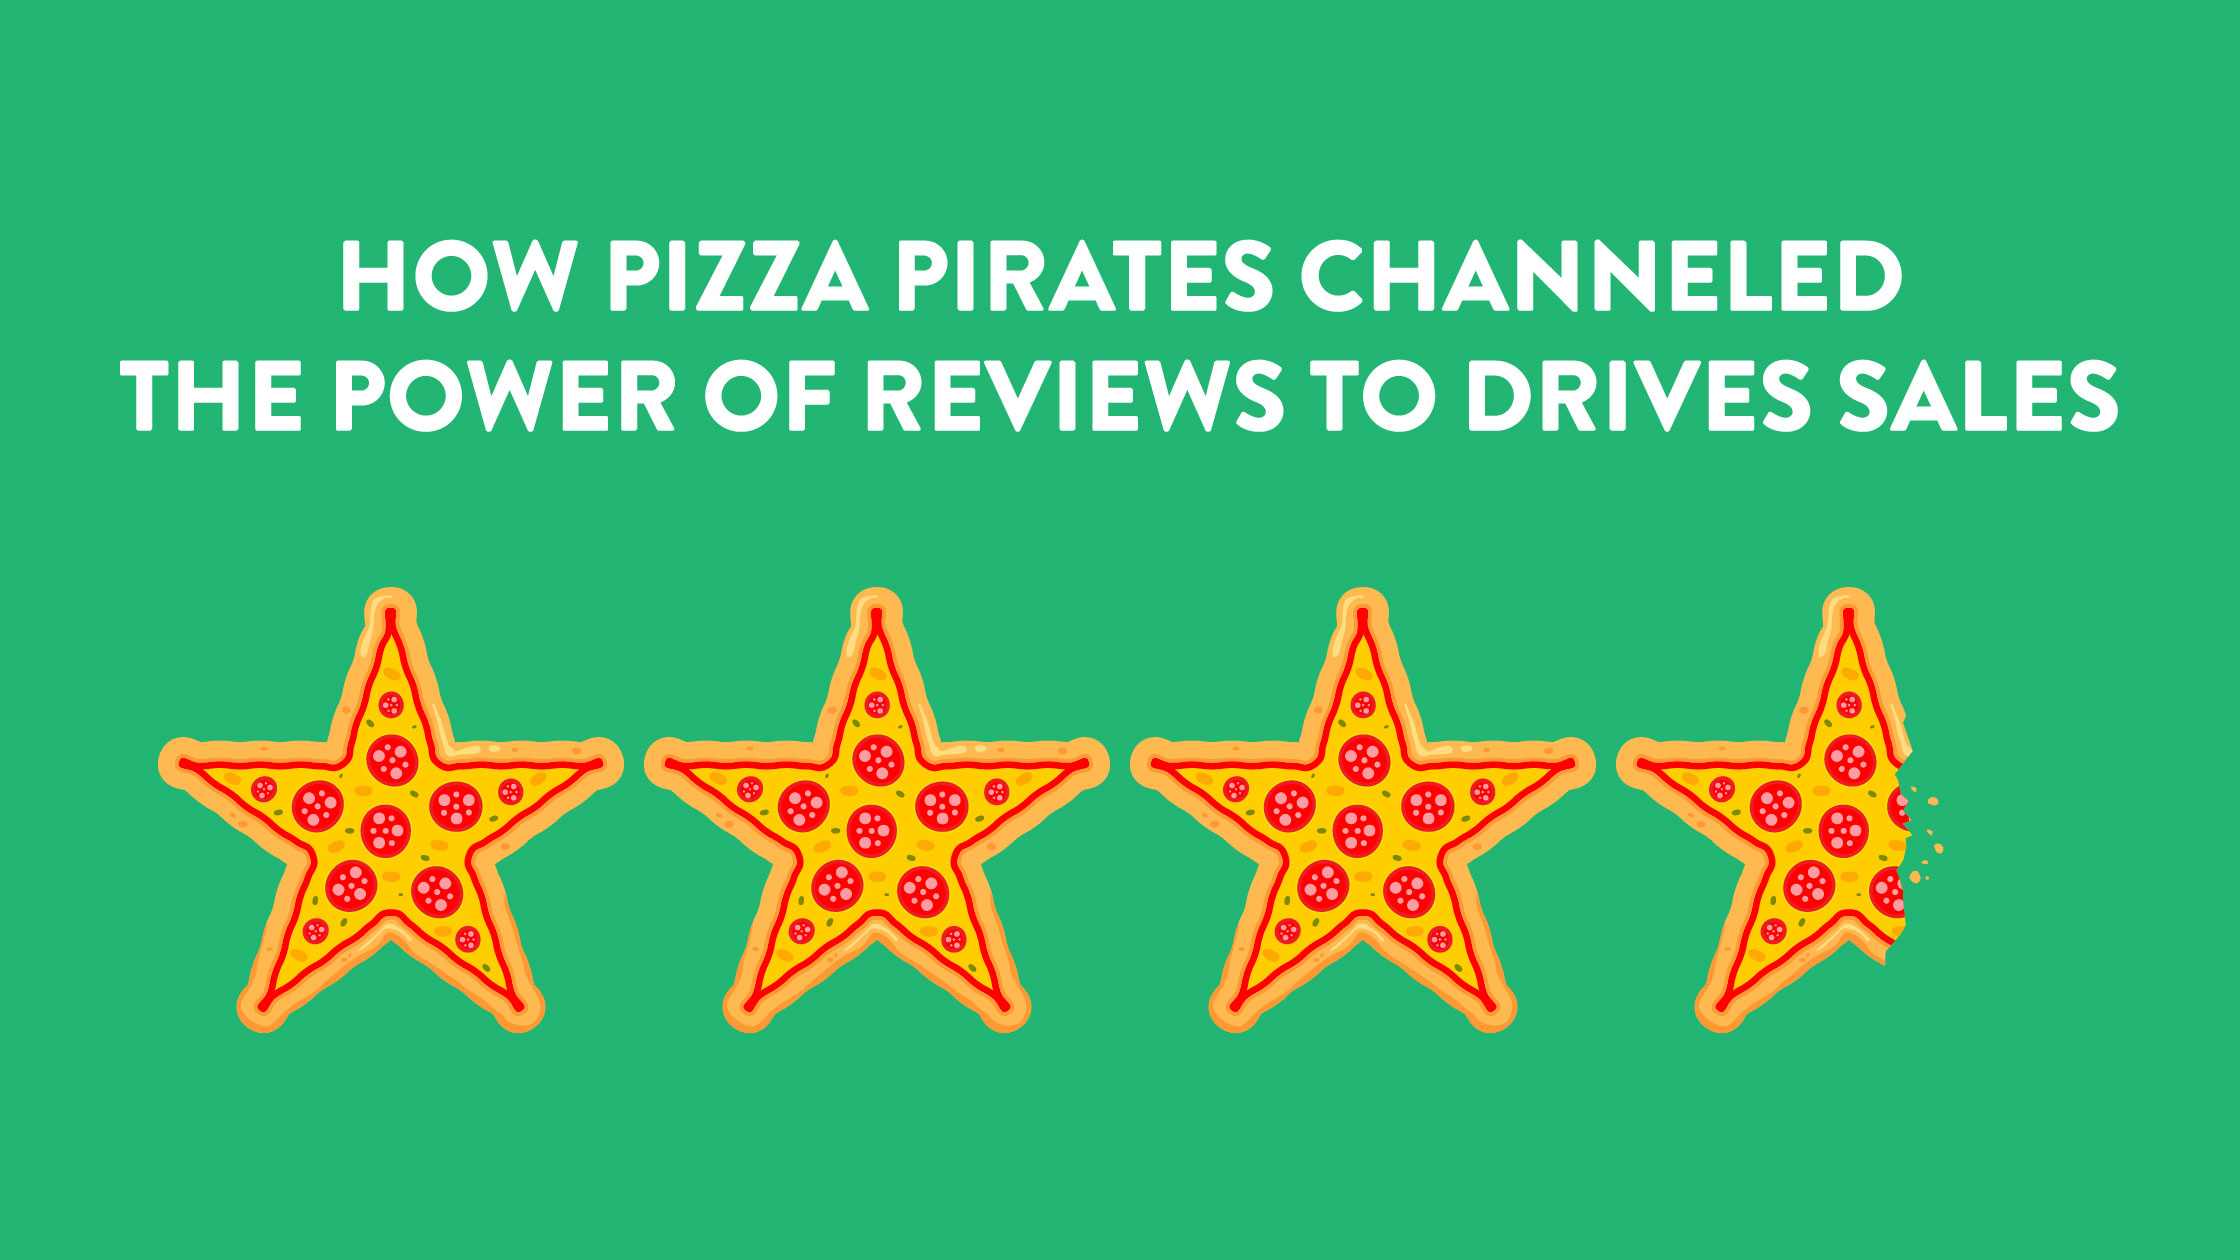 How Pizza Pirates channeled the power of reviews to drive sales